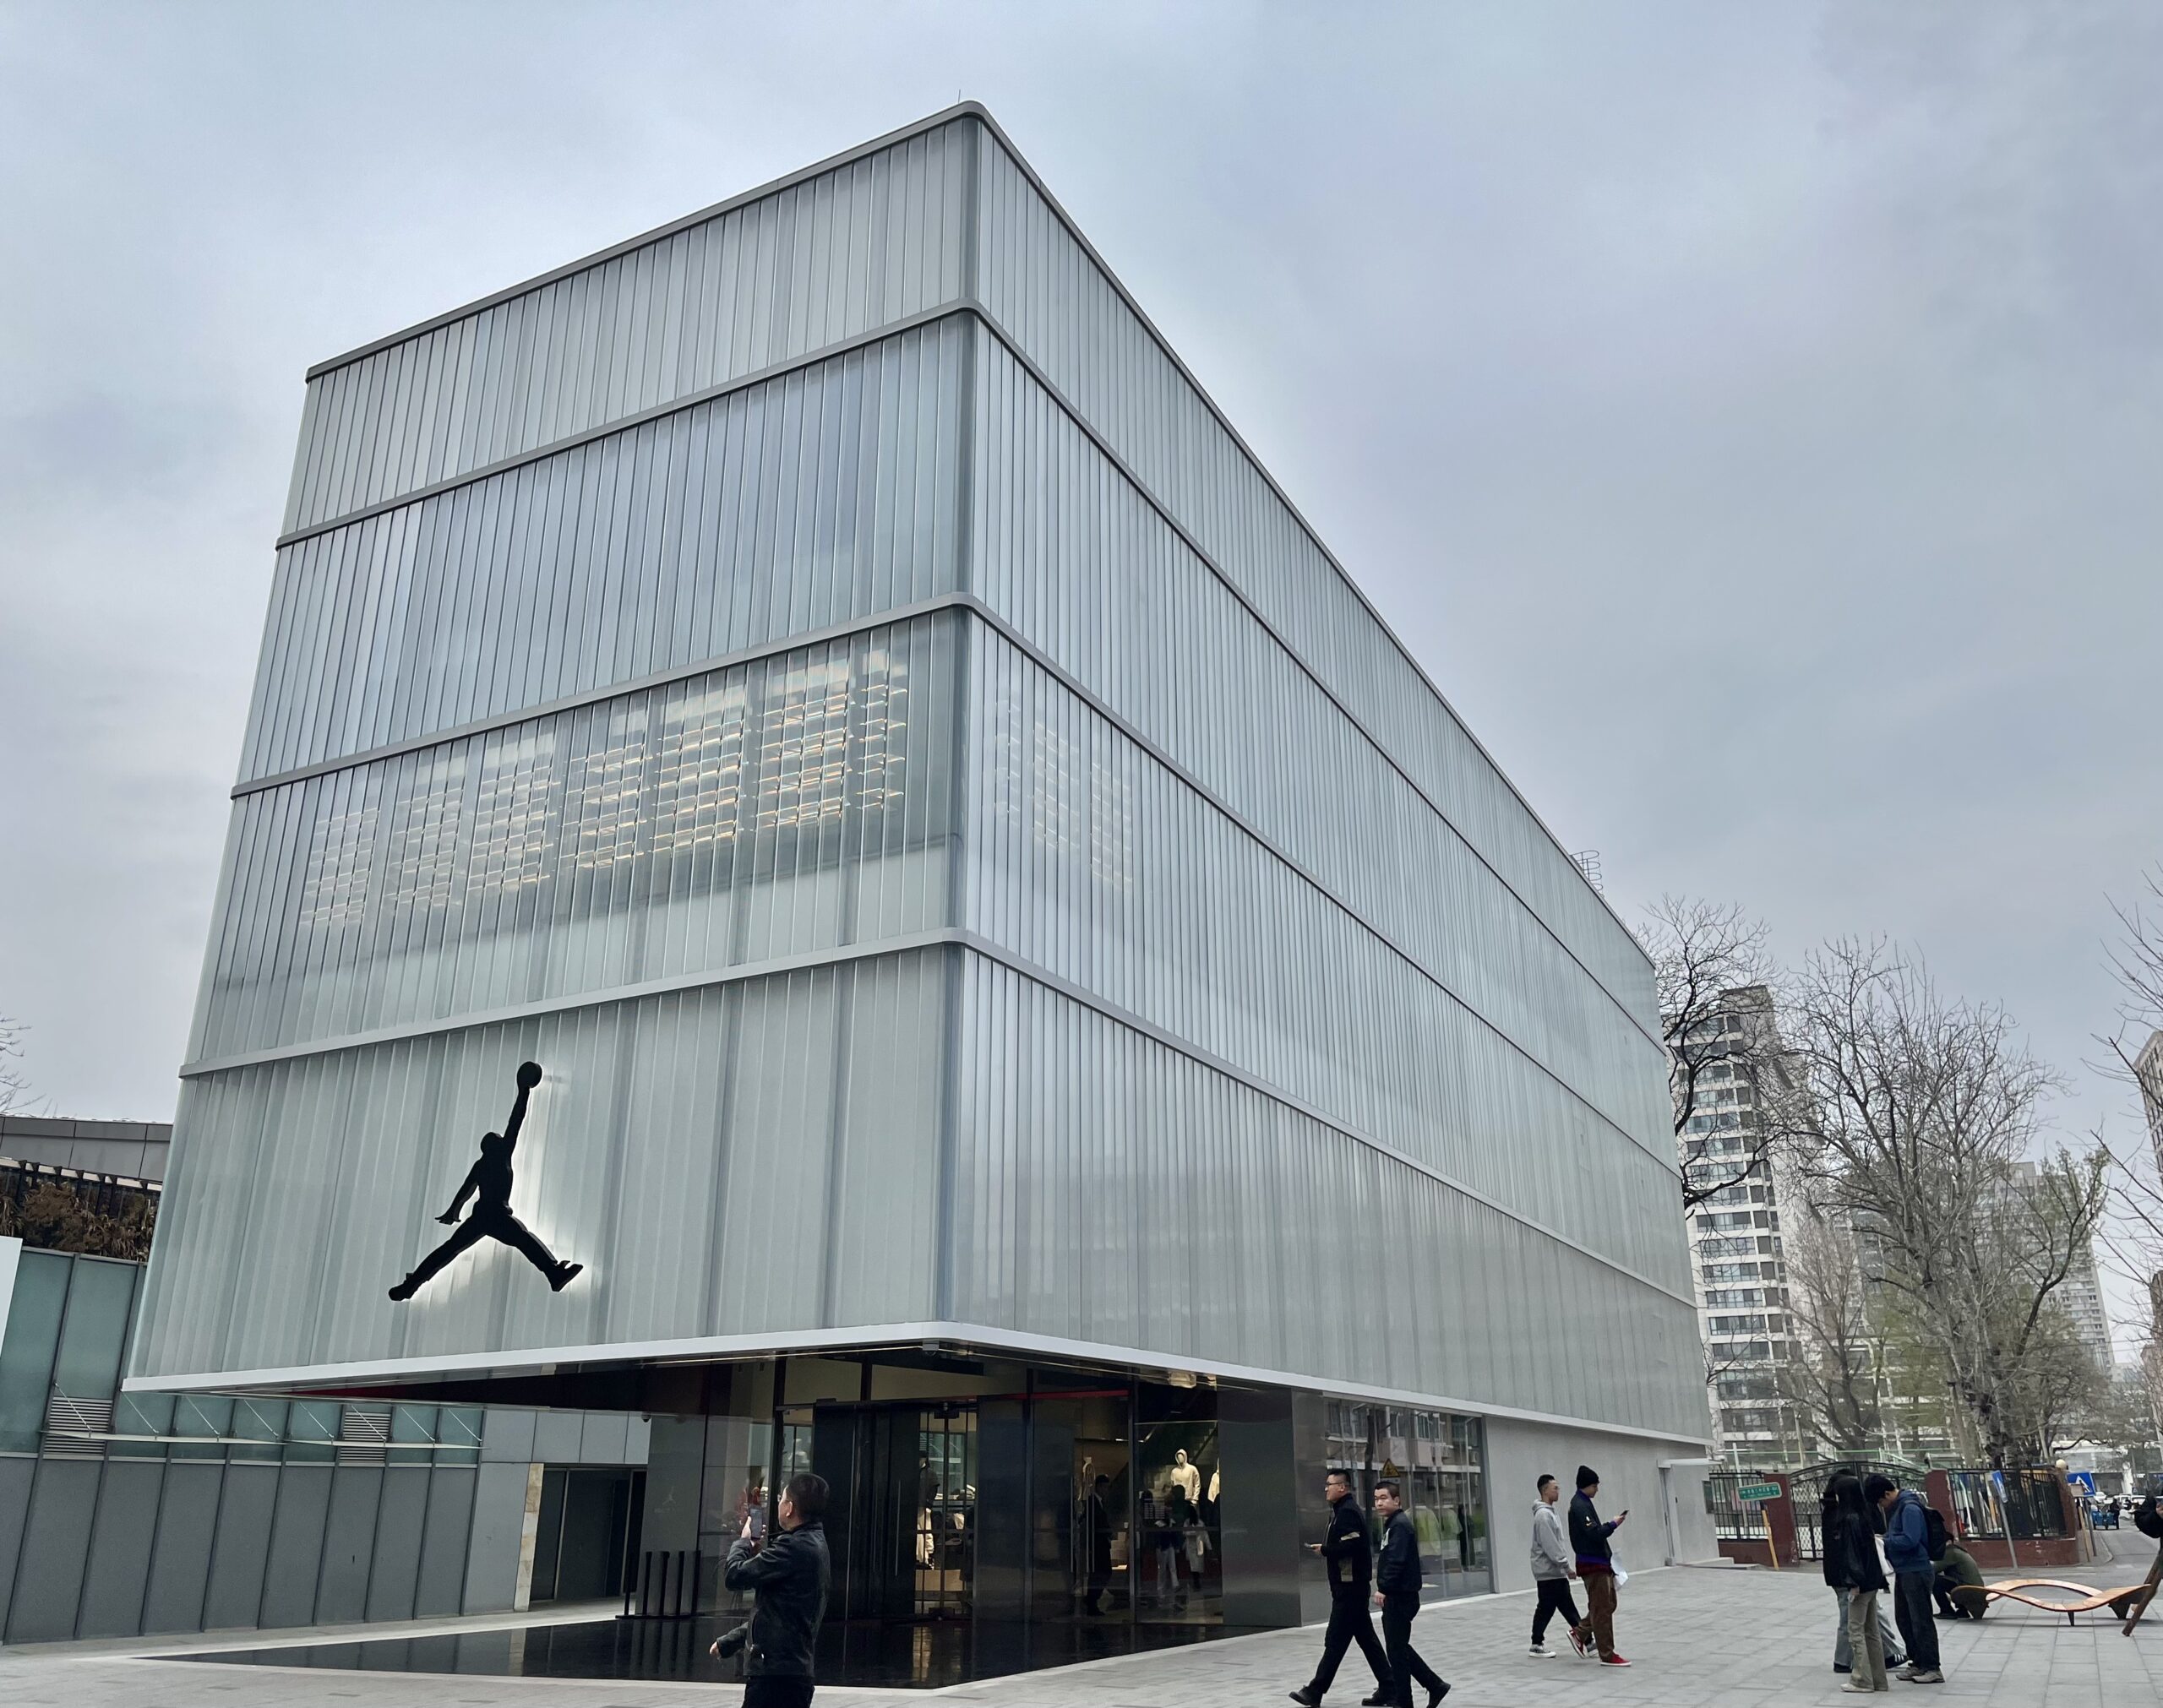 Items in Jordan Brand Sells for ¥10,000+, Will Chinese Consumers Pay for It?